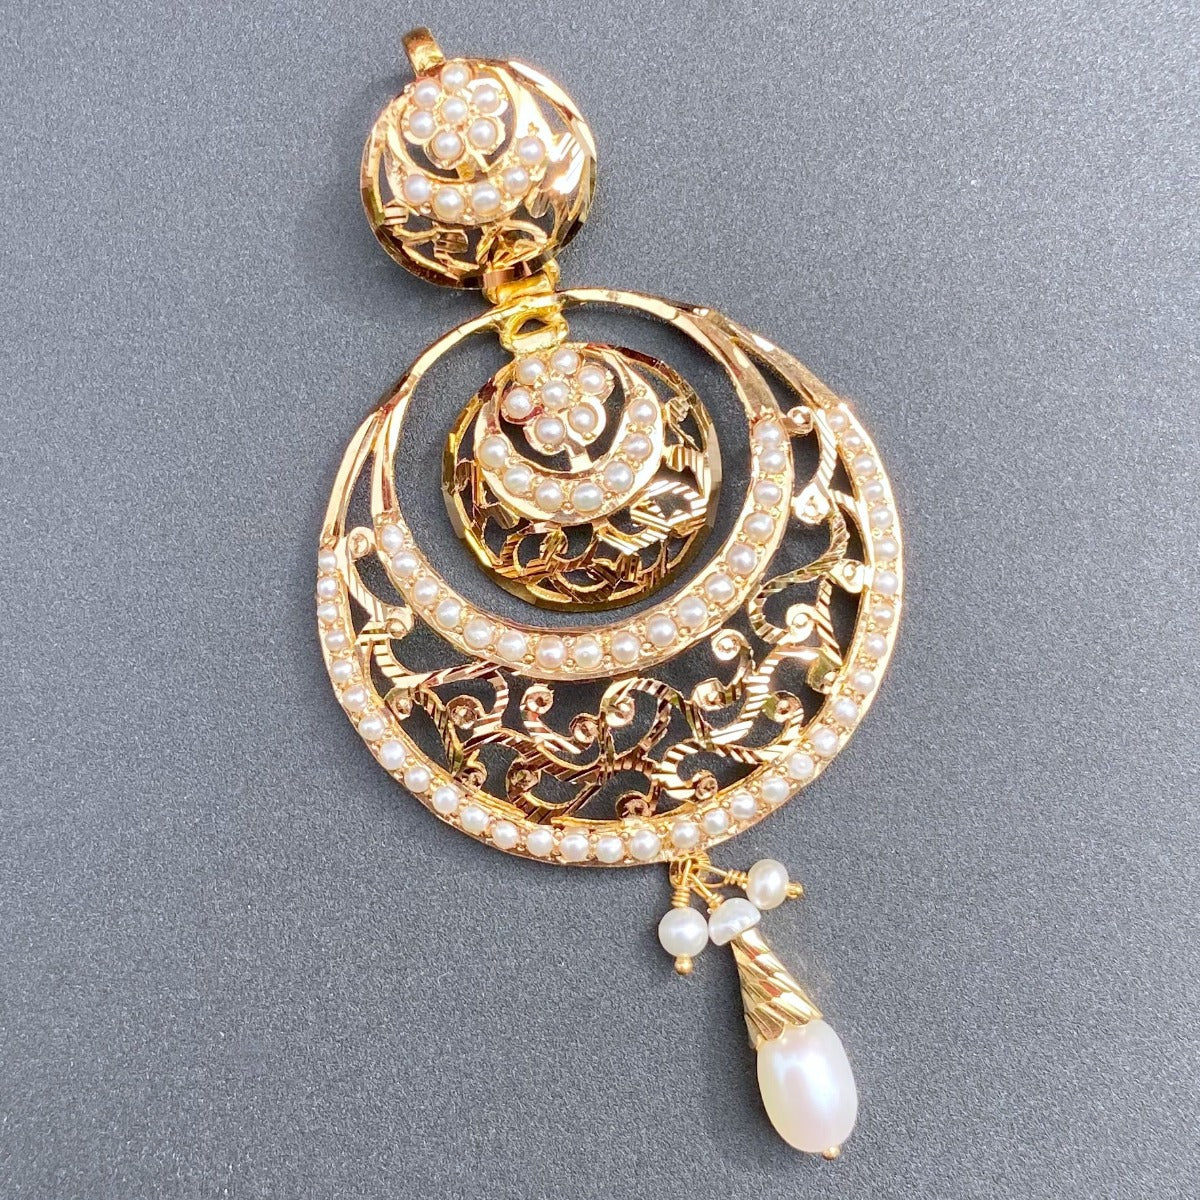 22k gold pendant with pearls